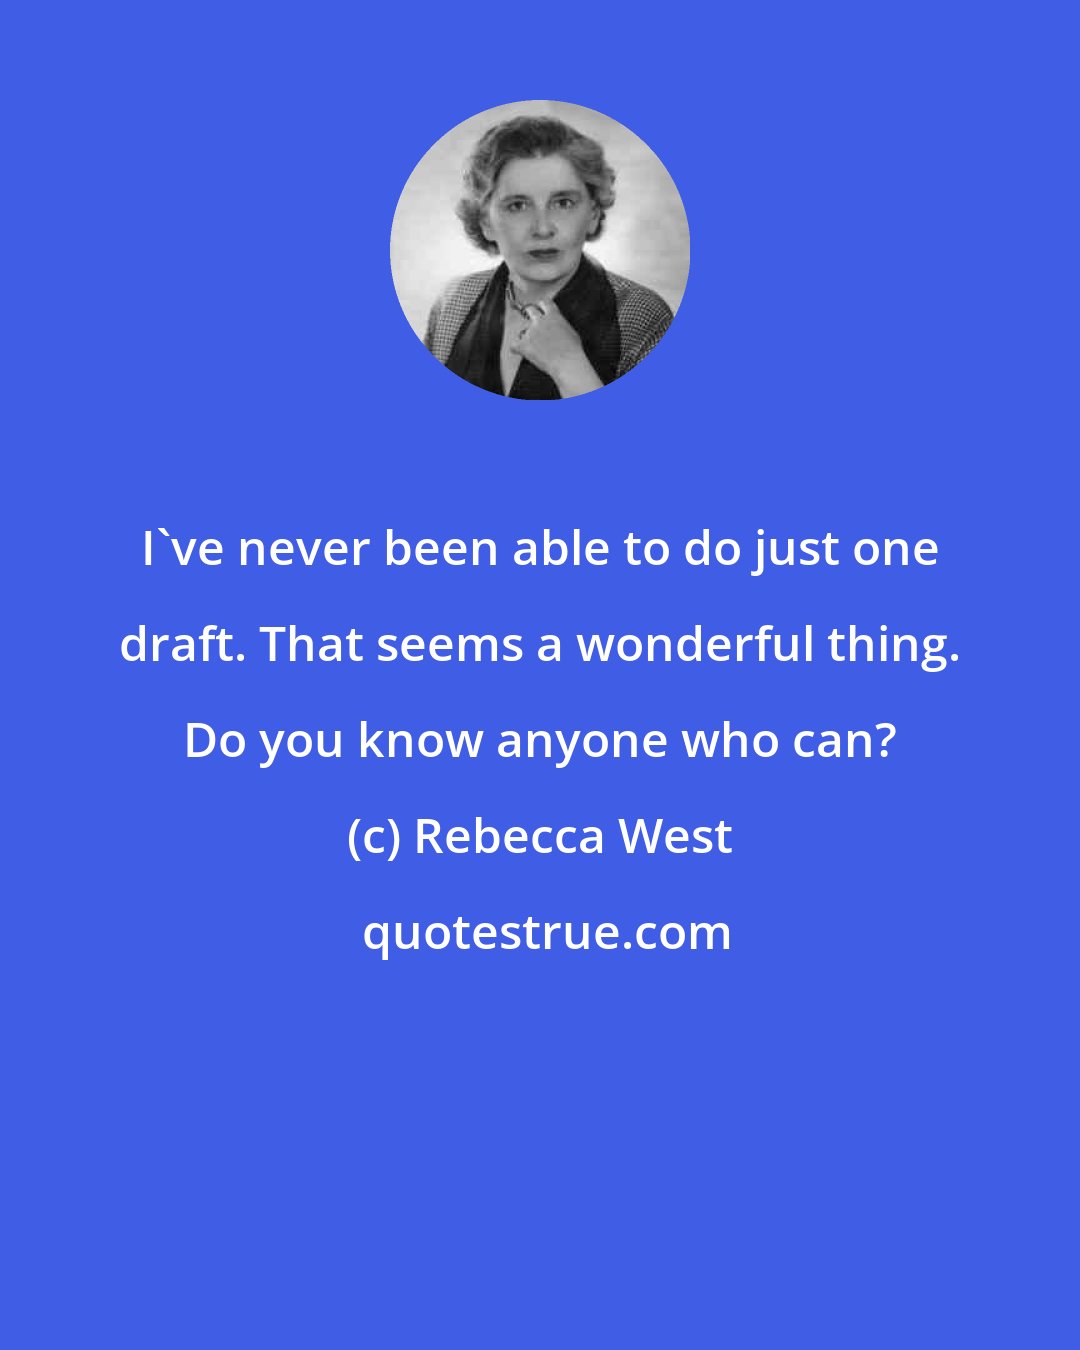 Rebecca West: I've never been able to do just one draft. That seems a wonderful thing. Do you know anyone who can?